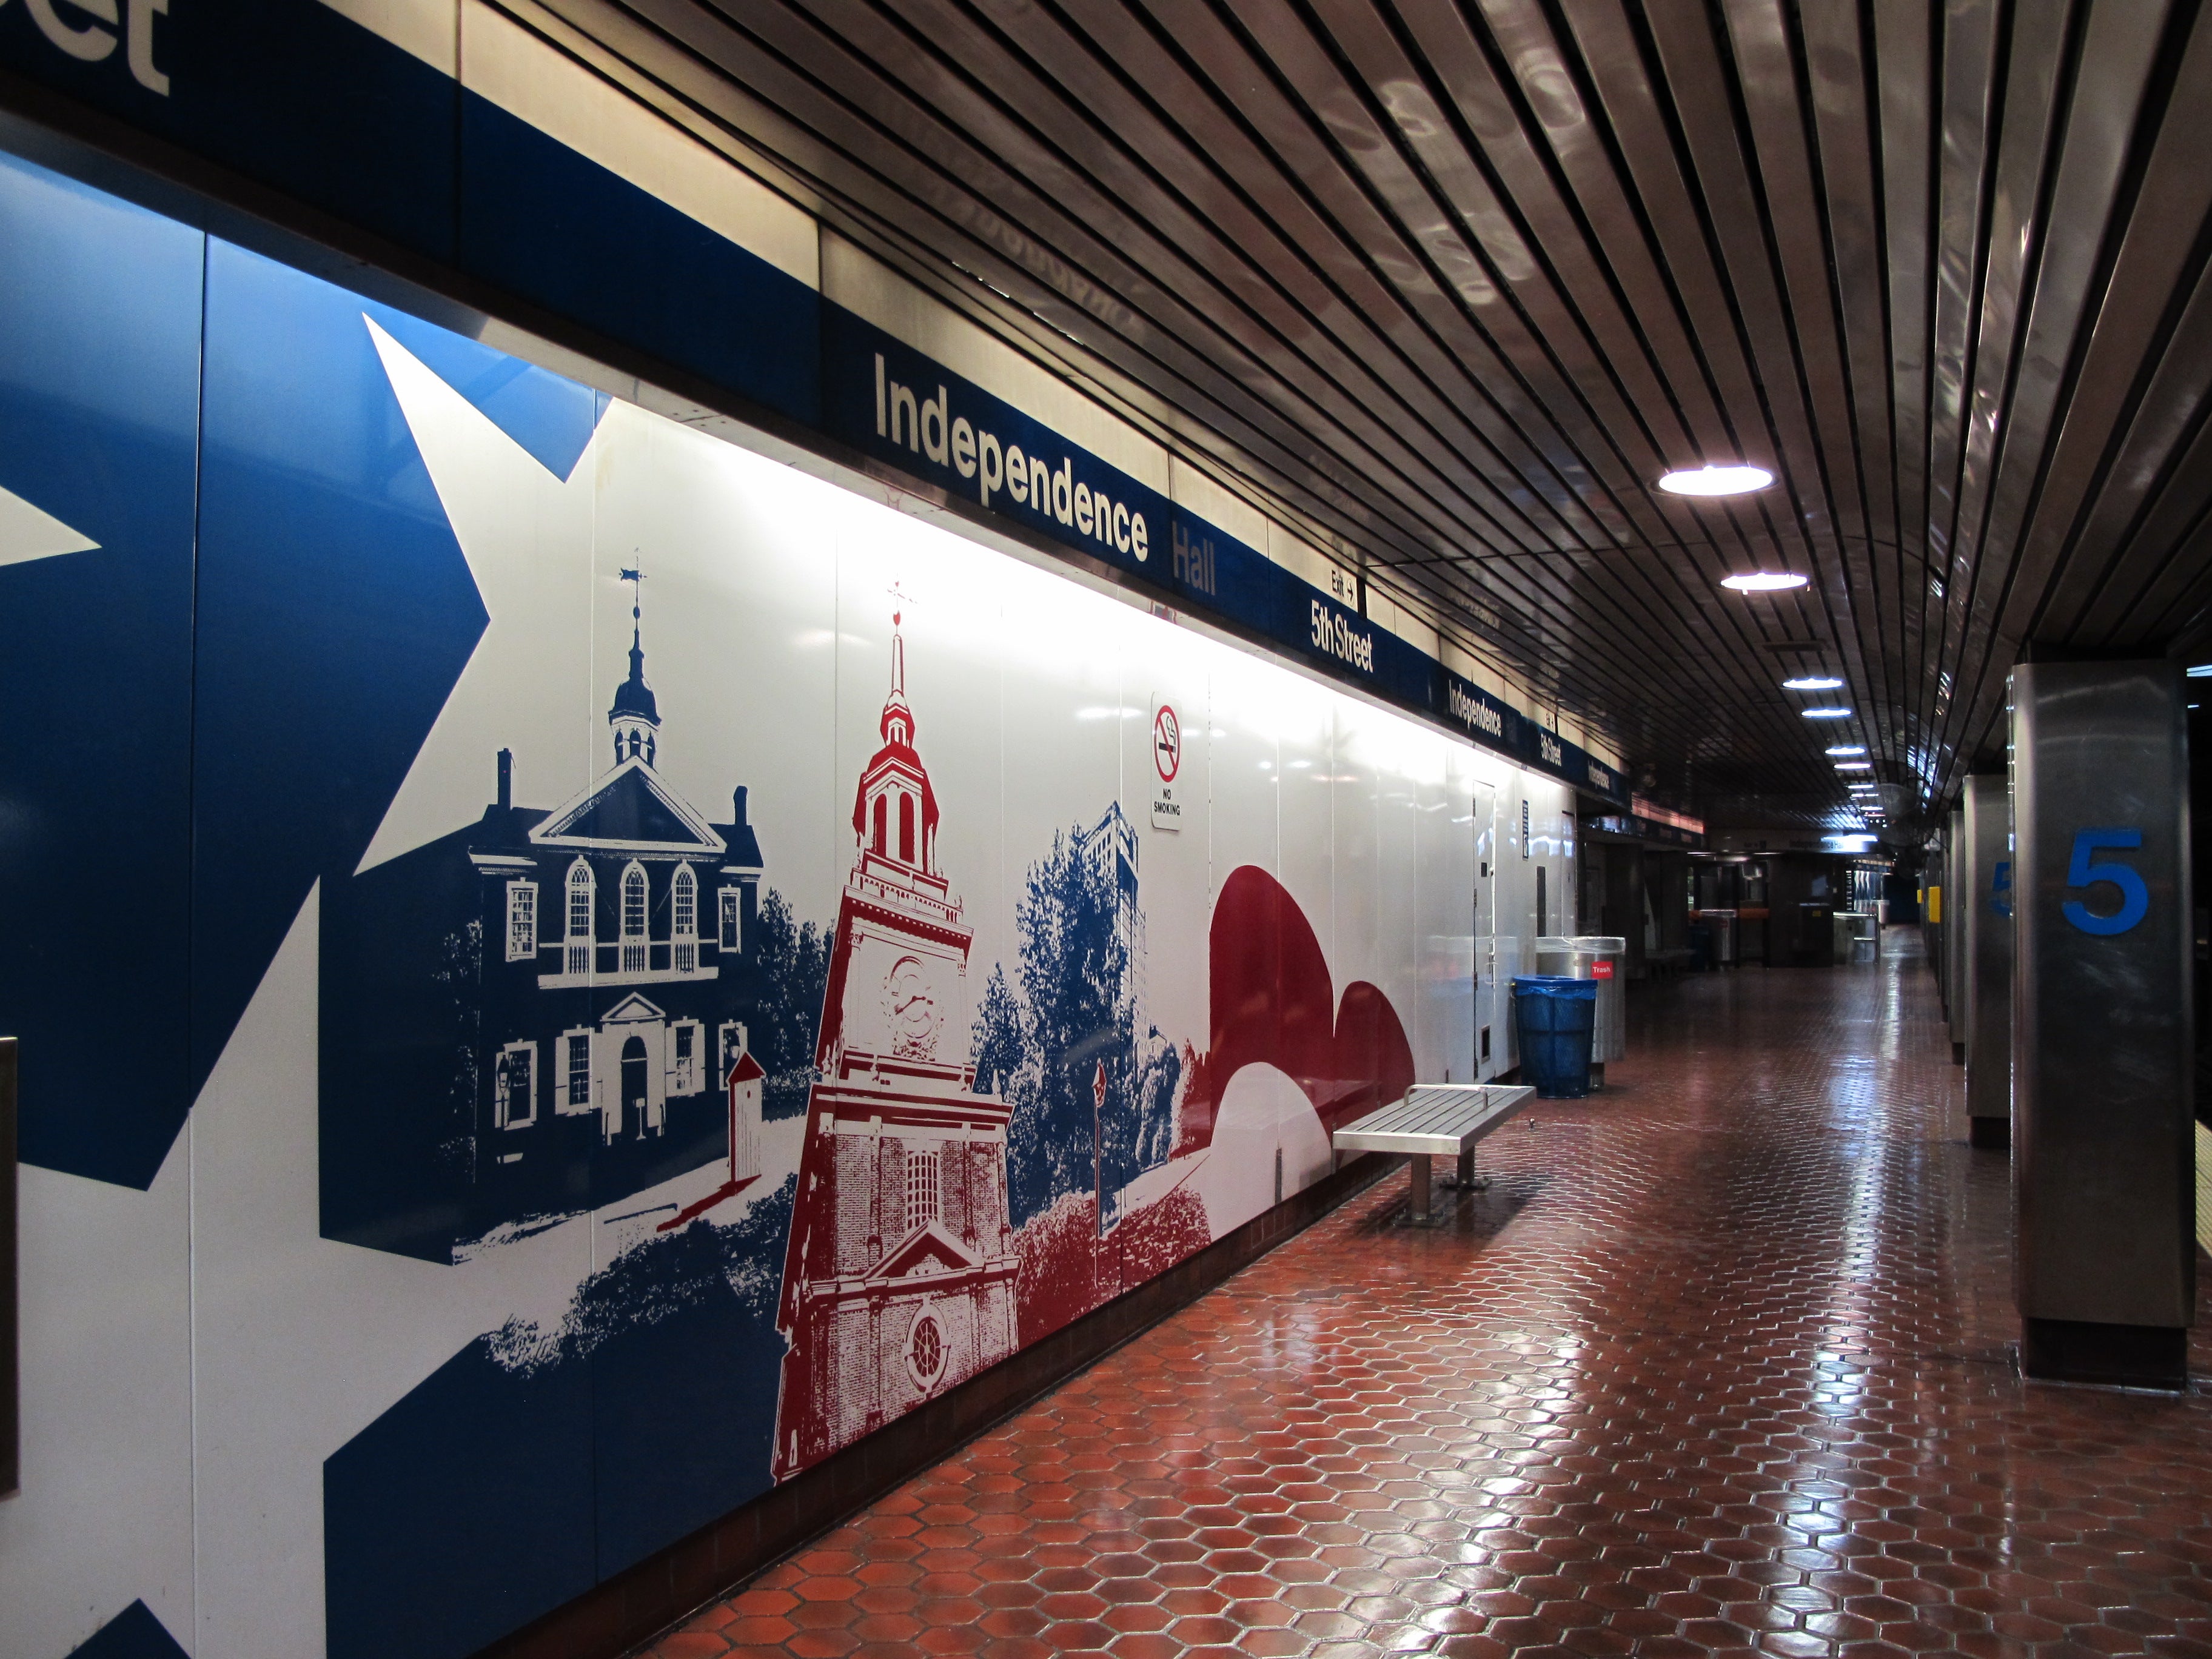 5th Street / Independence Hall station, July 2016